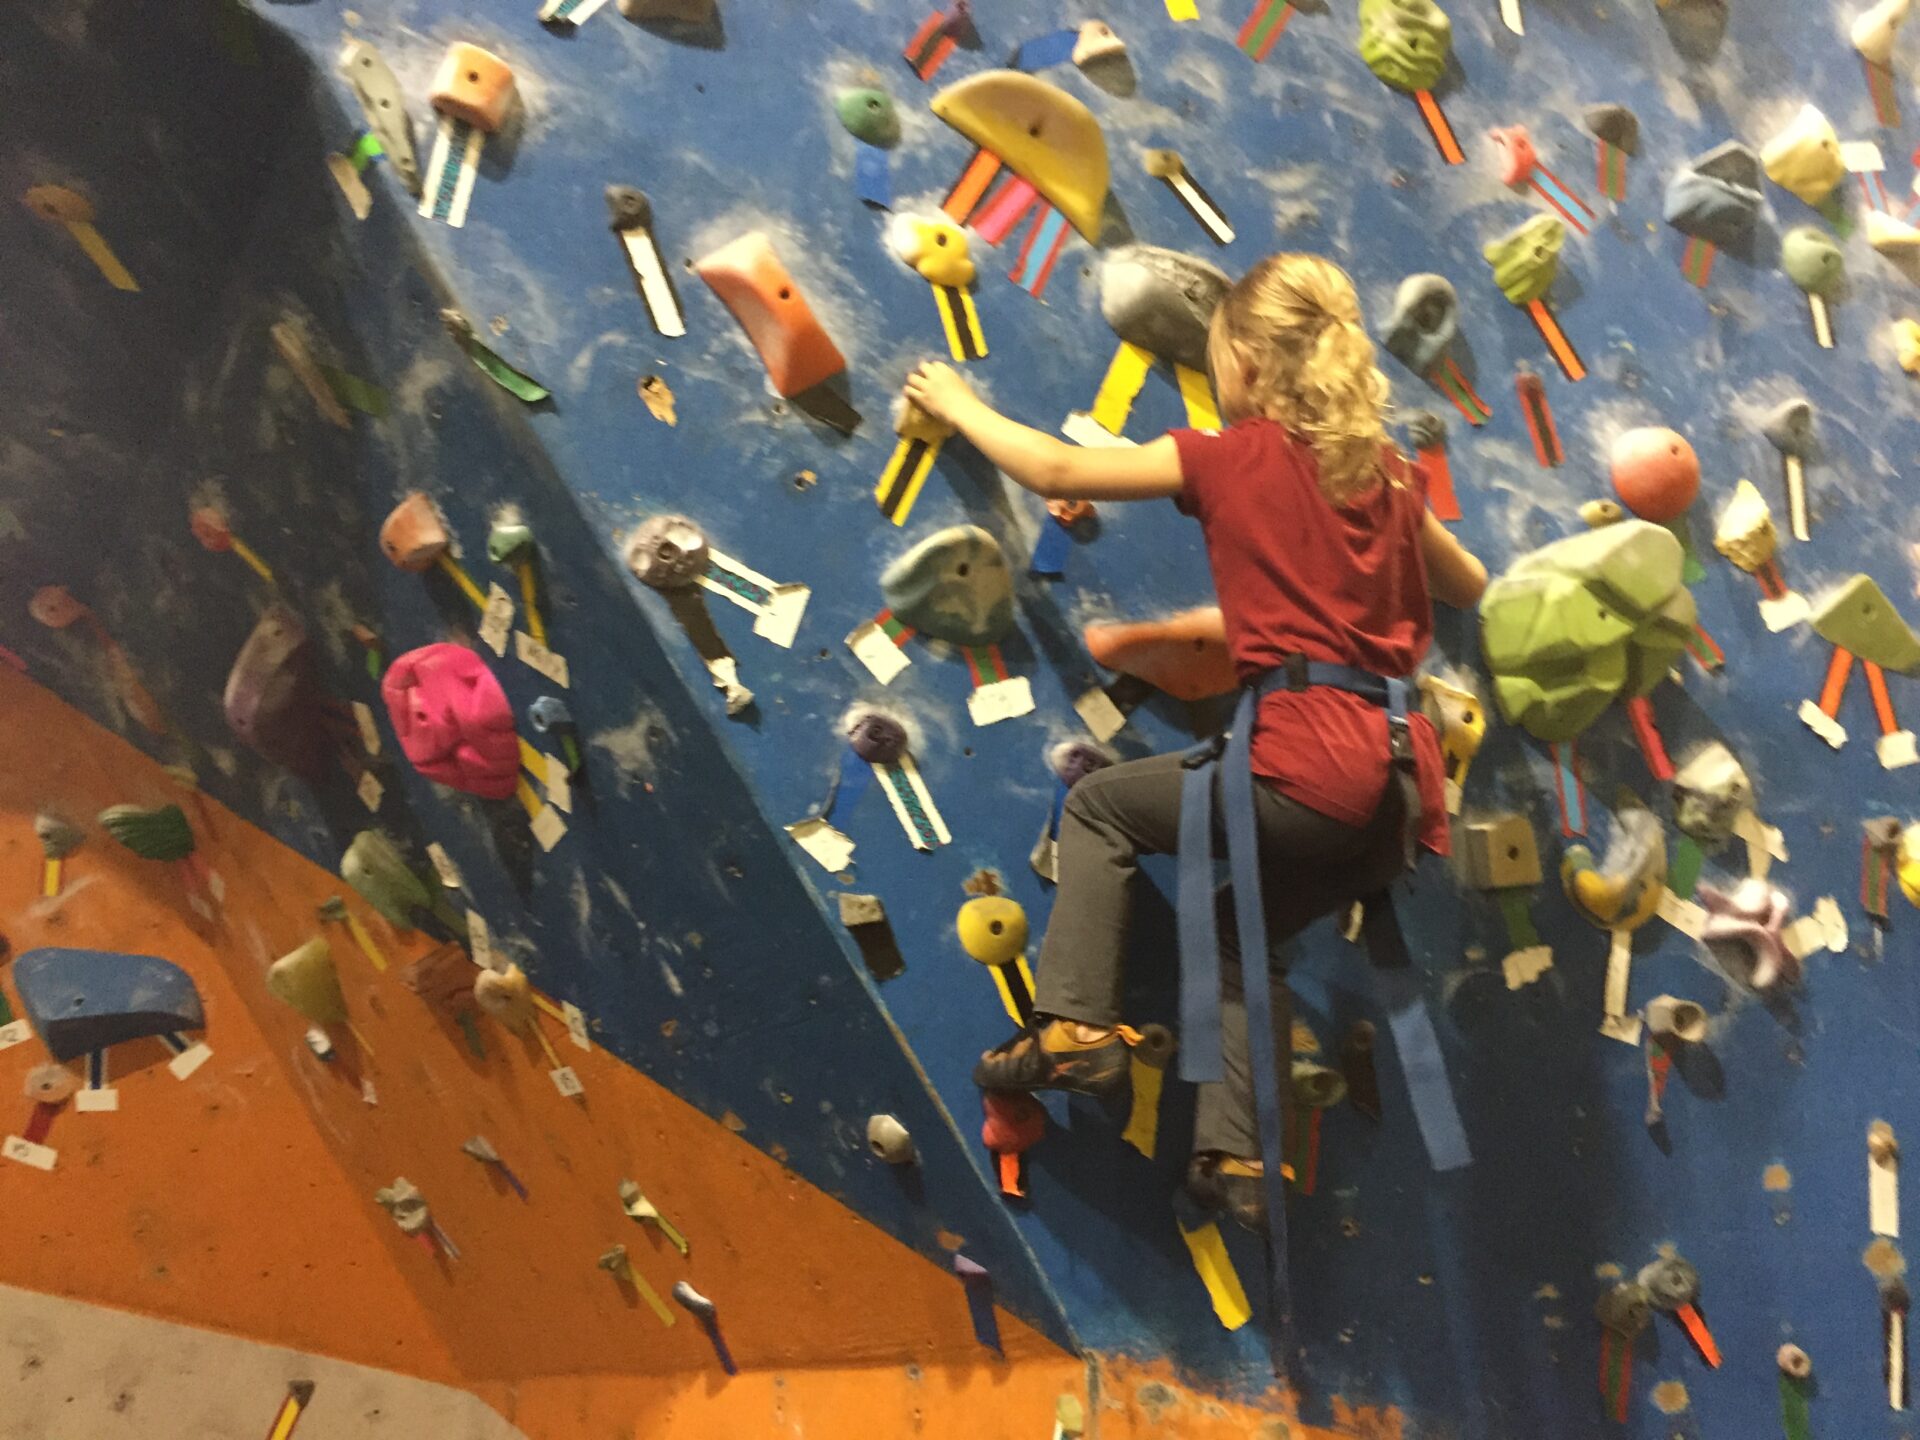 Project Climbing Centre Abbotsford - Young Girl Climbing with #ExploreBCbyBus